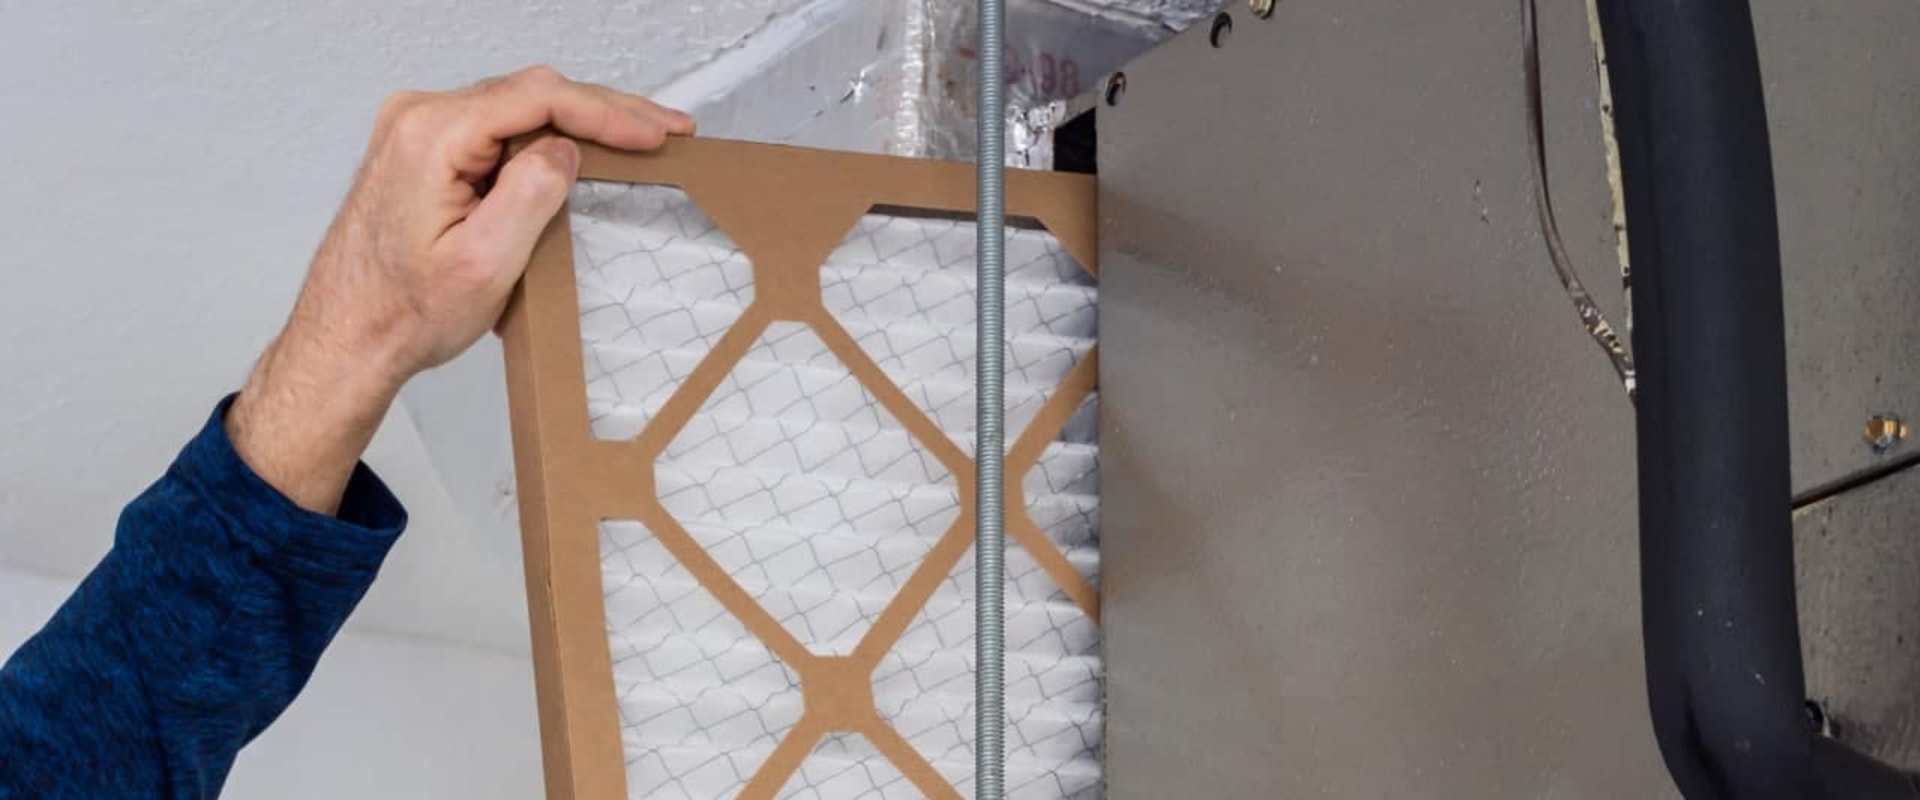 How Often Should You Change a 16x20x1 Air Filter?